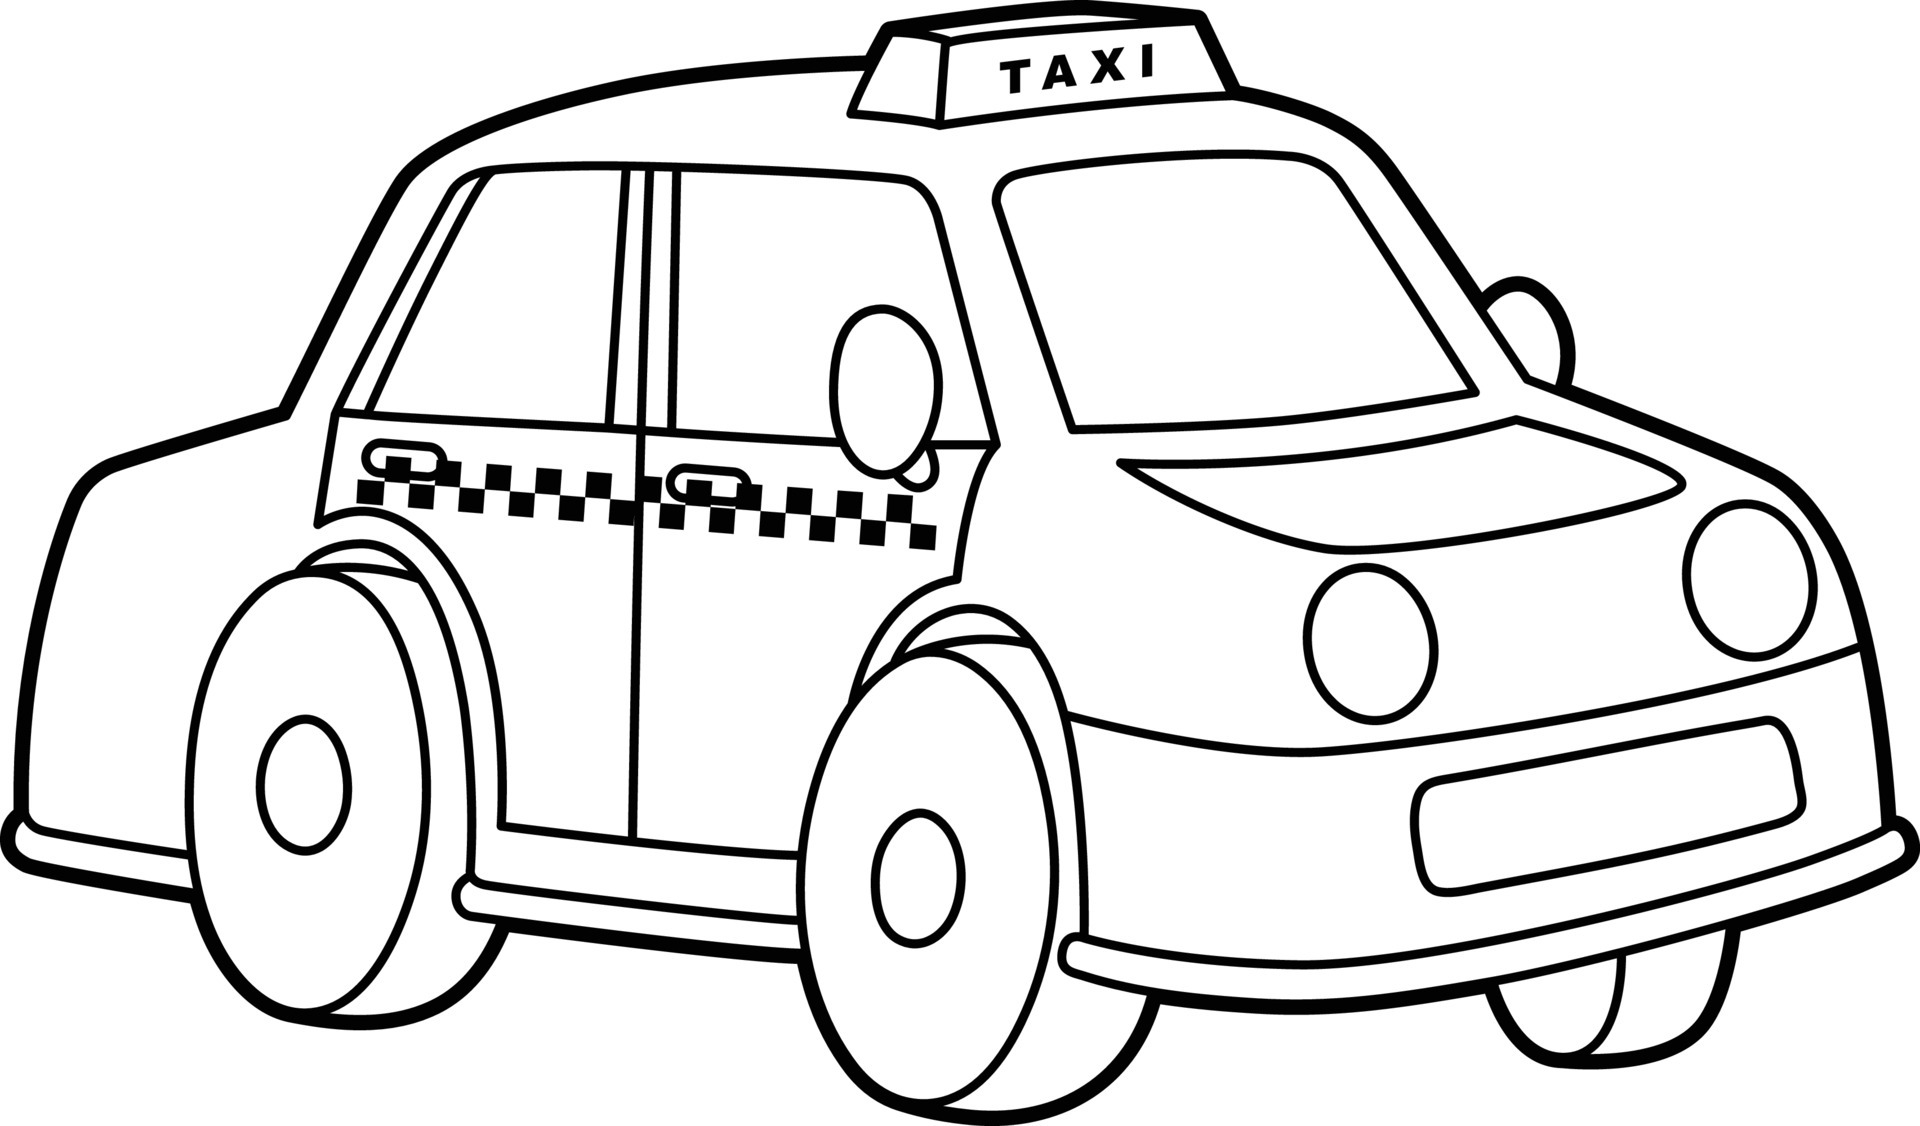 Taxi Coloring Page Isolated for Kids 20 Vector Art at Vecteezy